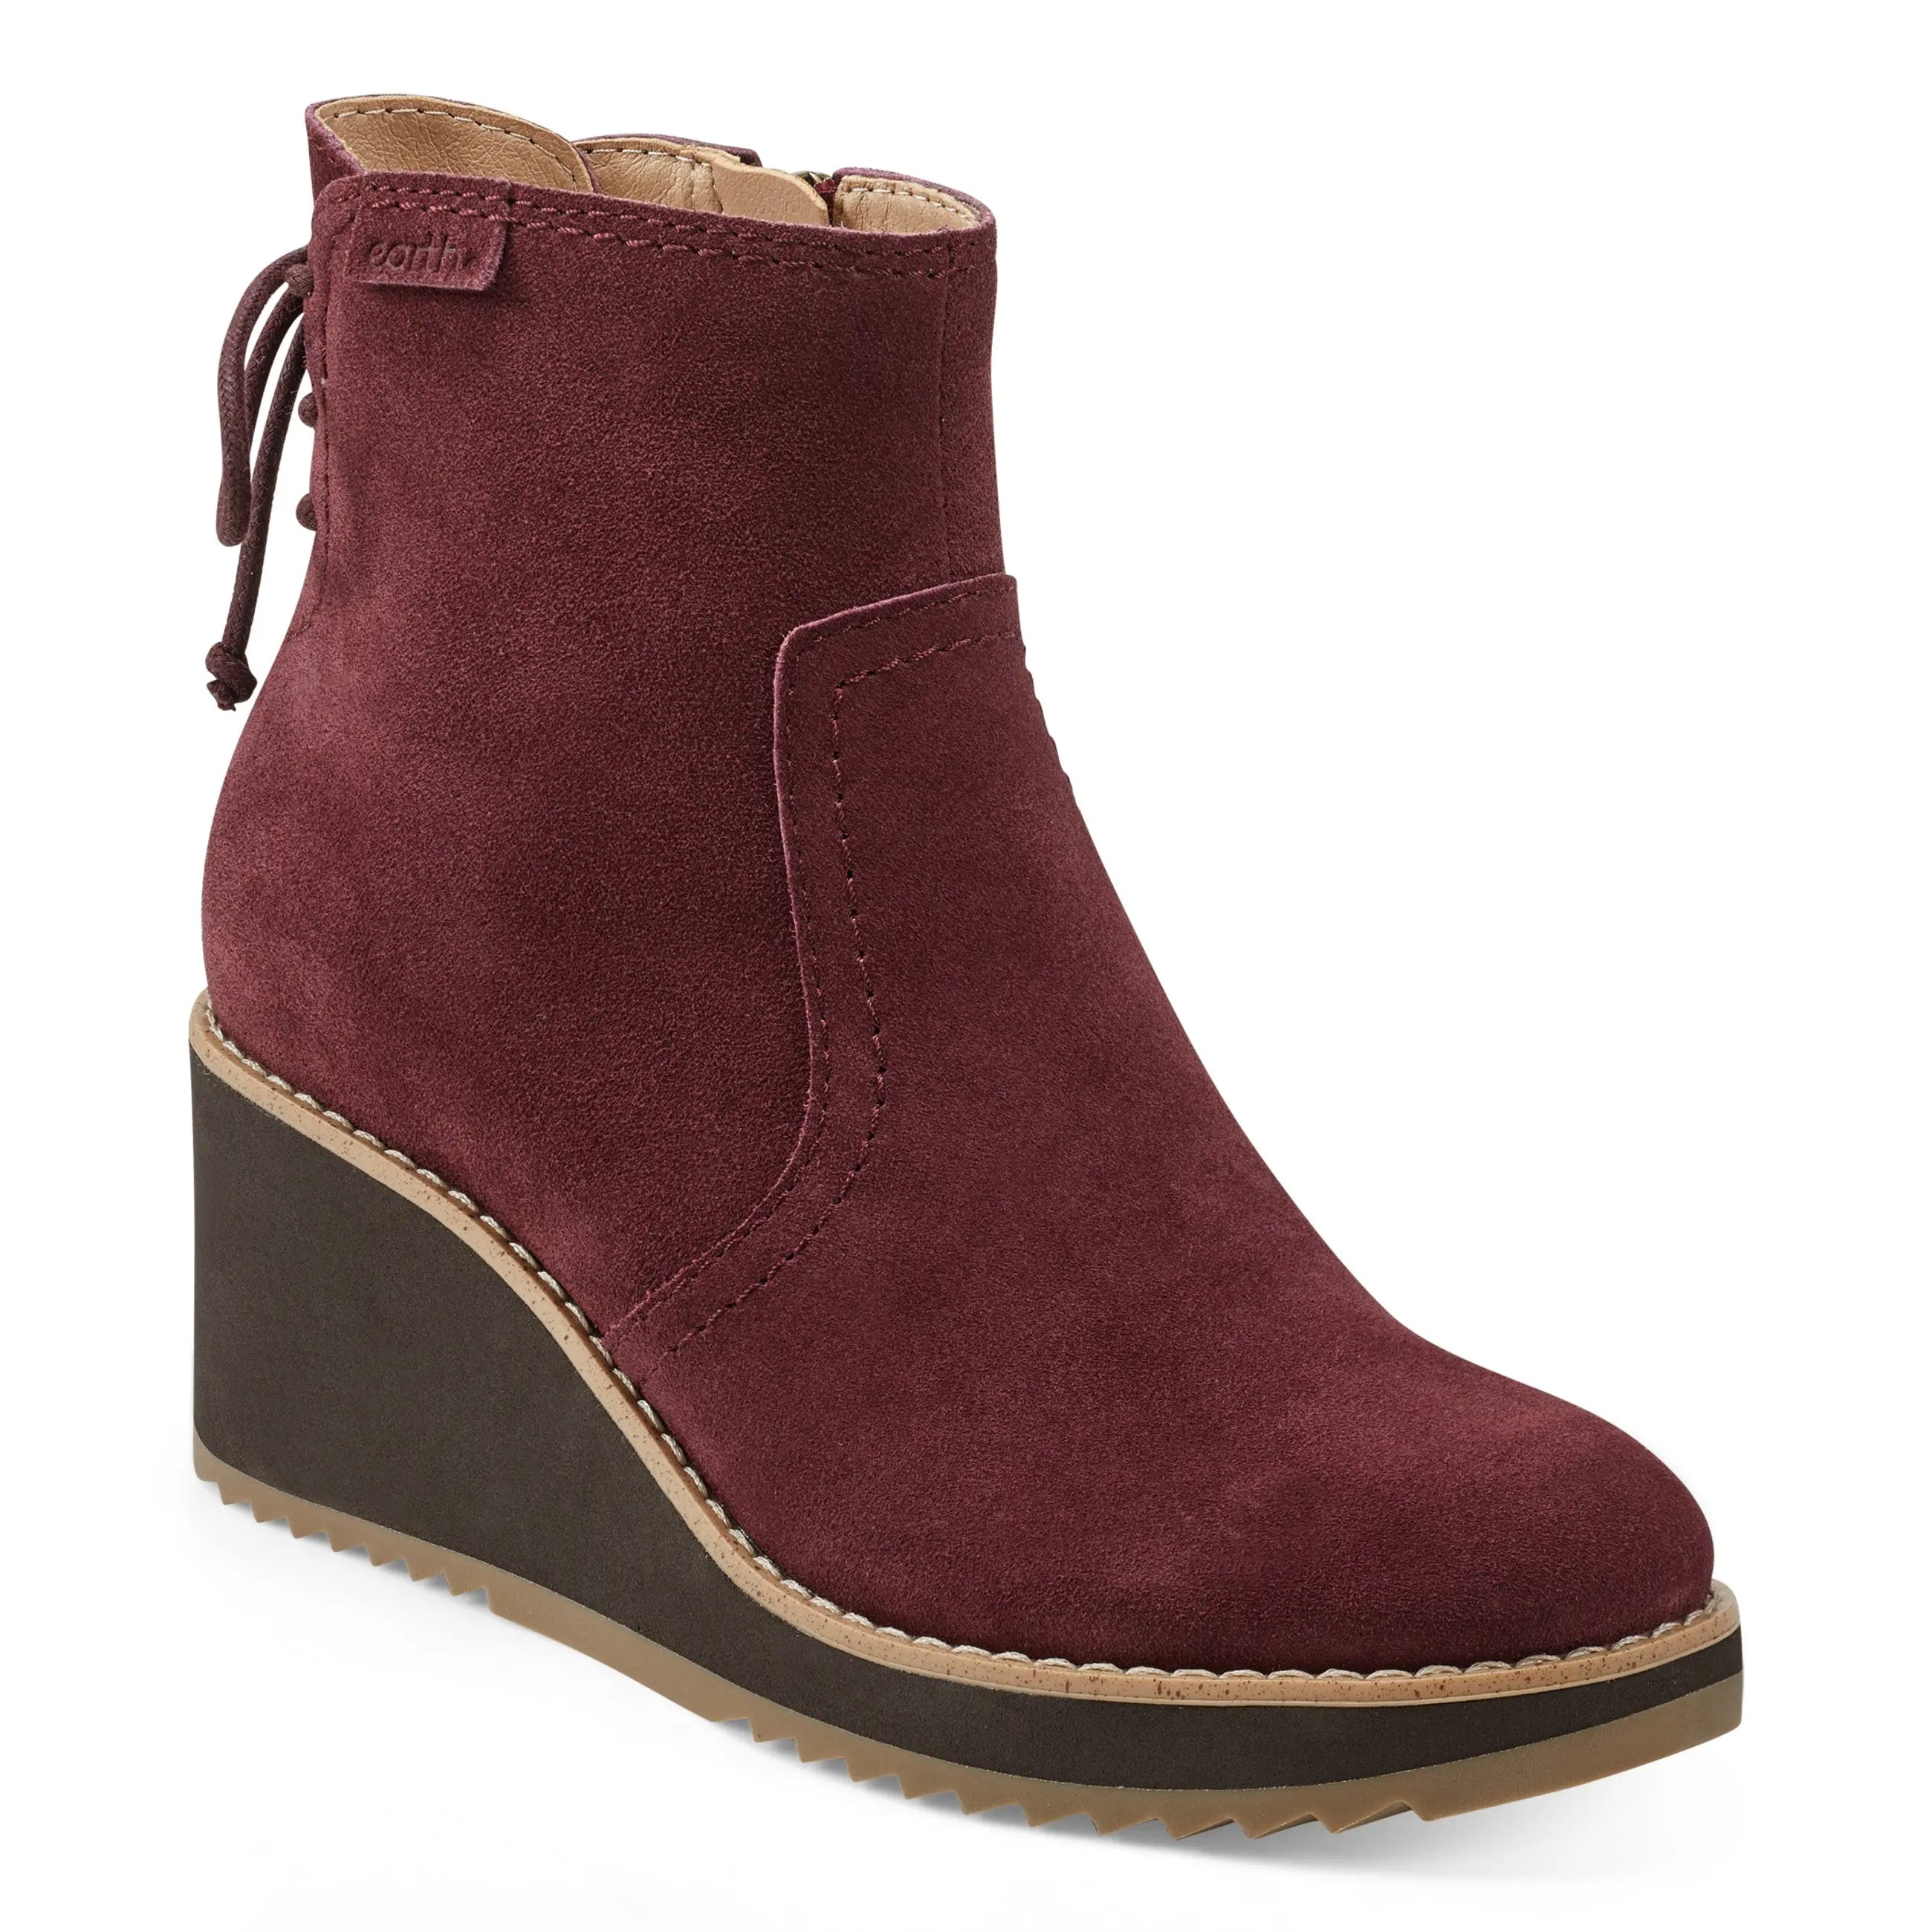 Calia Round Toe Casual Wedge Ankle Booties